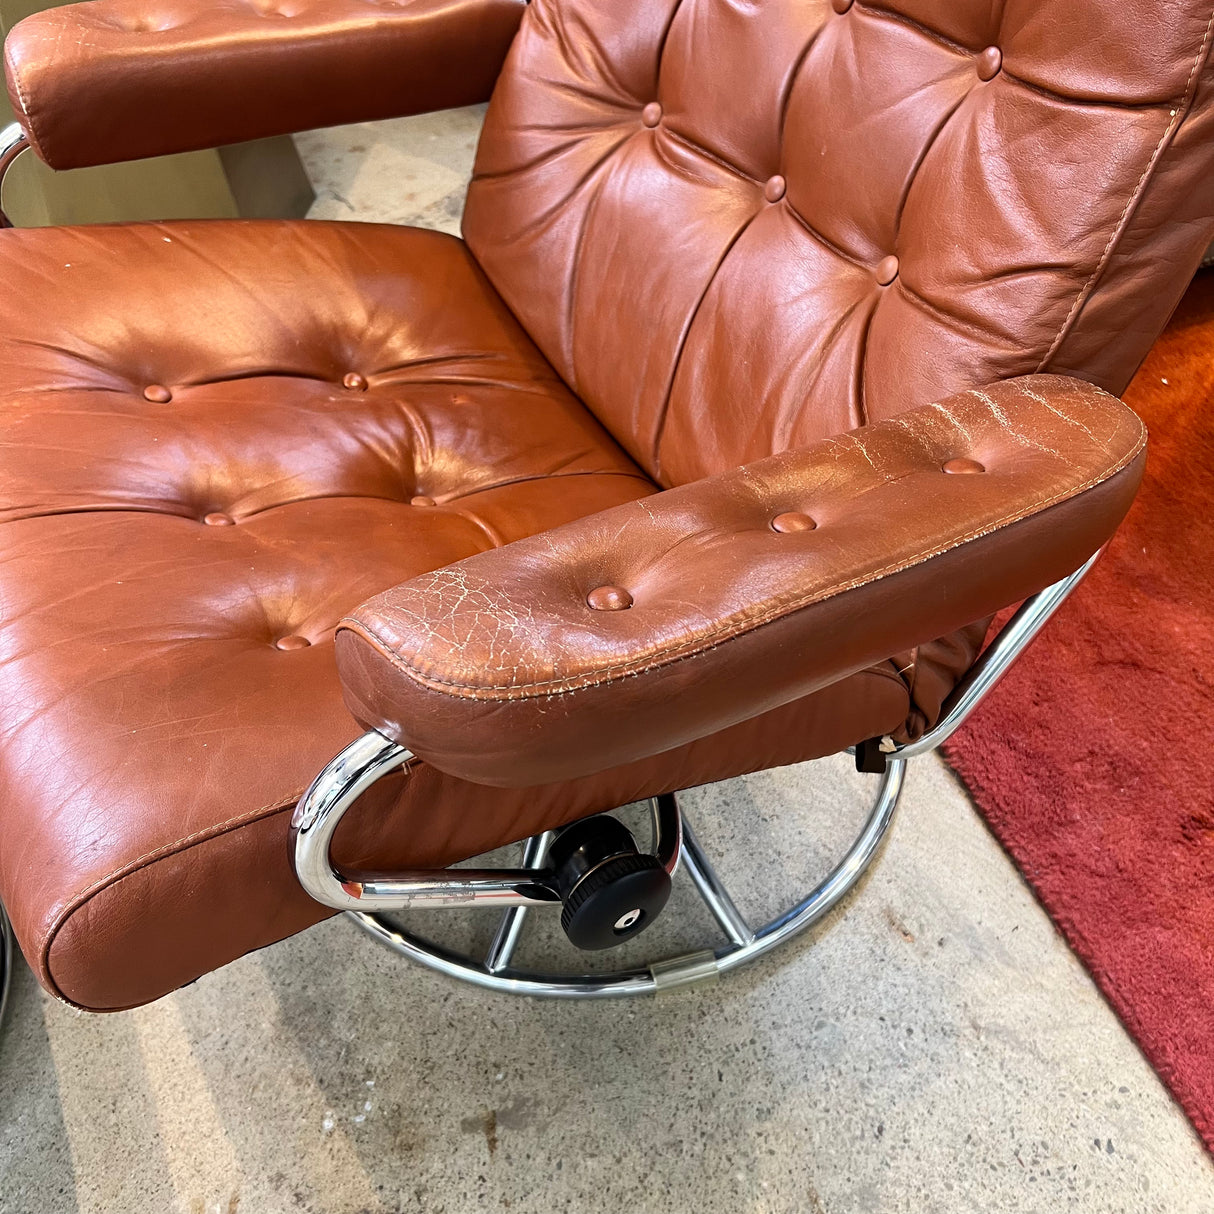 1970s Ekornes Stressless Leather Lounge Chair and Ottoman